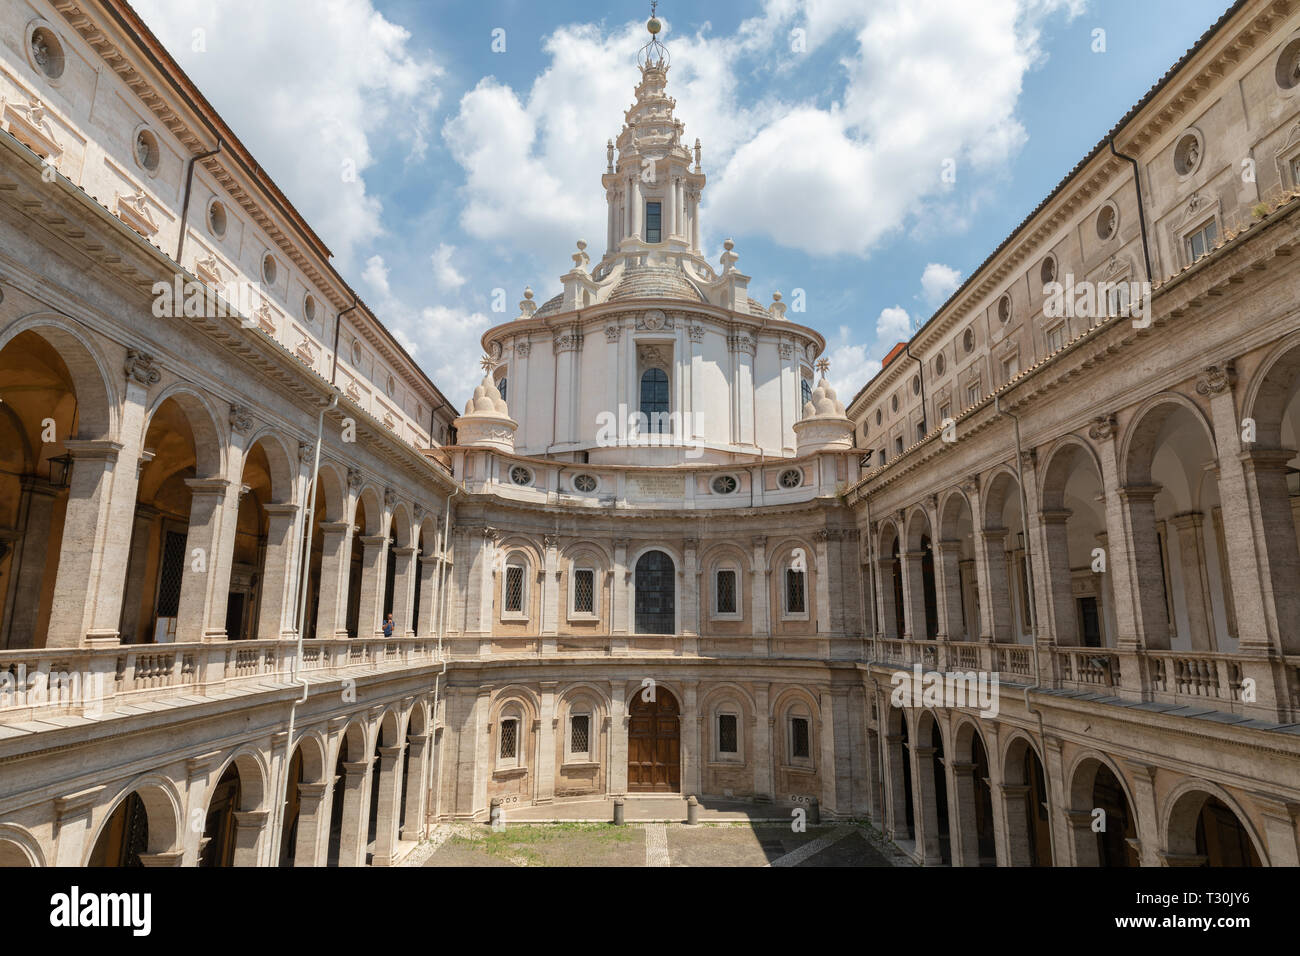 Rome, Italy - June 21, 2018: Panoramic view of exterior of Sant'Ivo alla Sapienza. It is a Roman Catholic church in Rome. Built in 1642-1660 by the ar Stock Photo